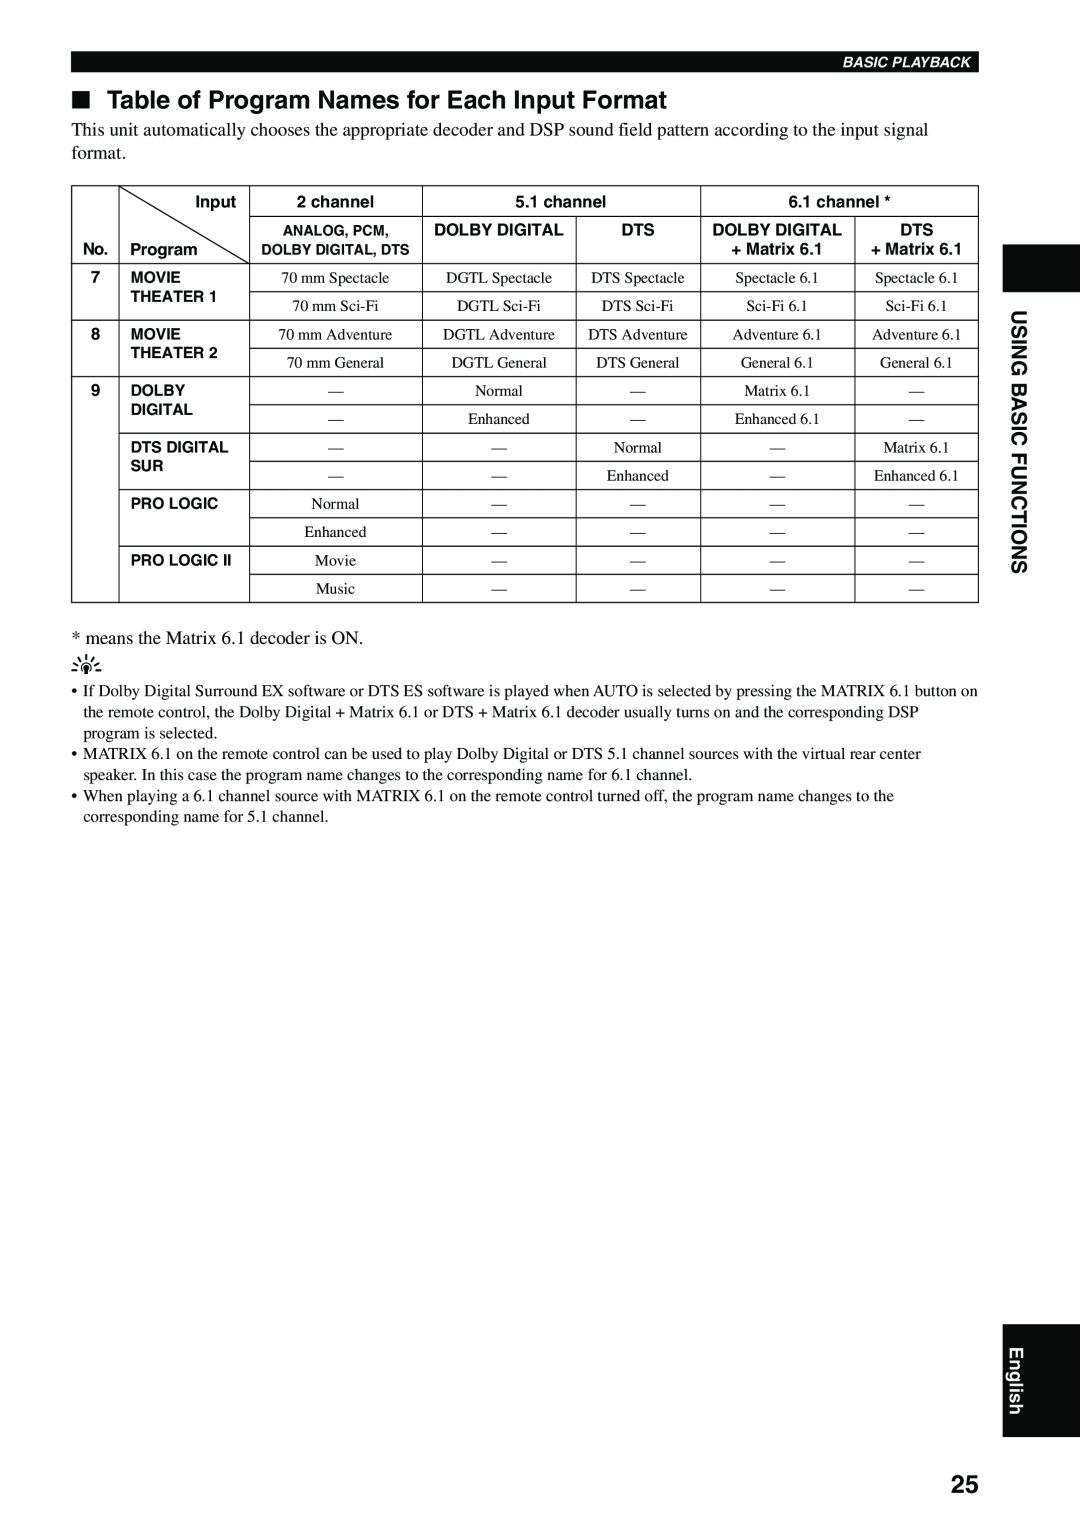 Yamaha DVX-S100 owner manual Table of Program Names for Each Input Format, Using Basic Functions, English 